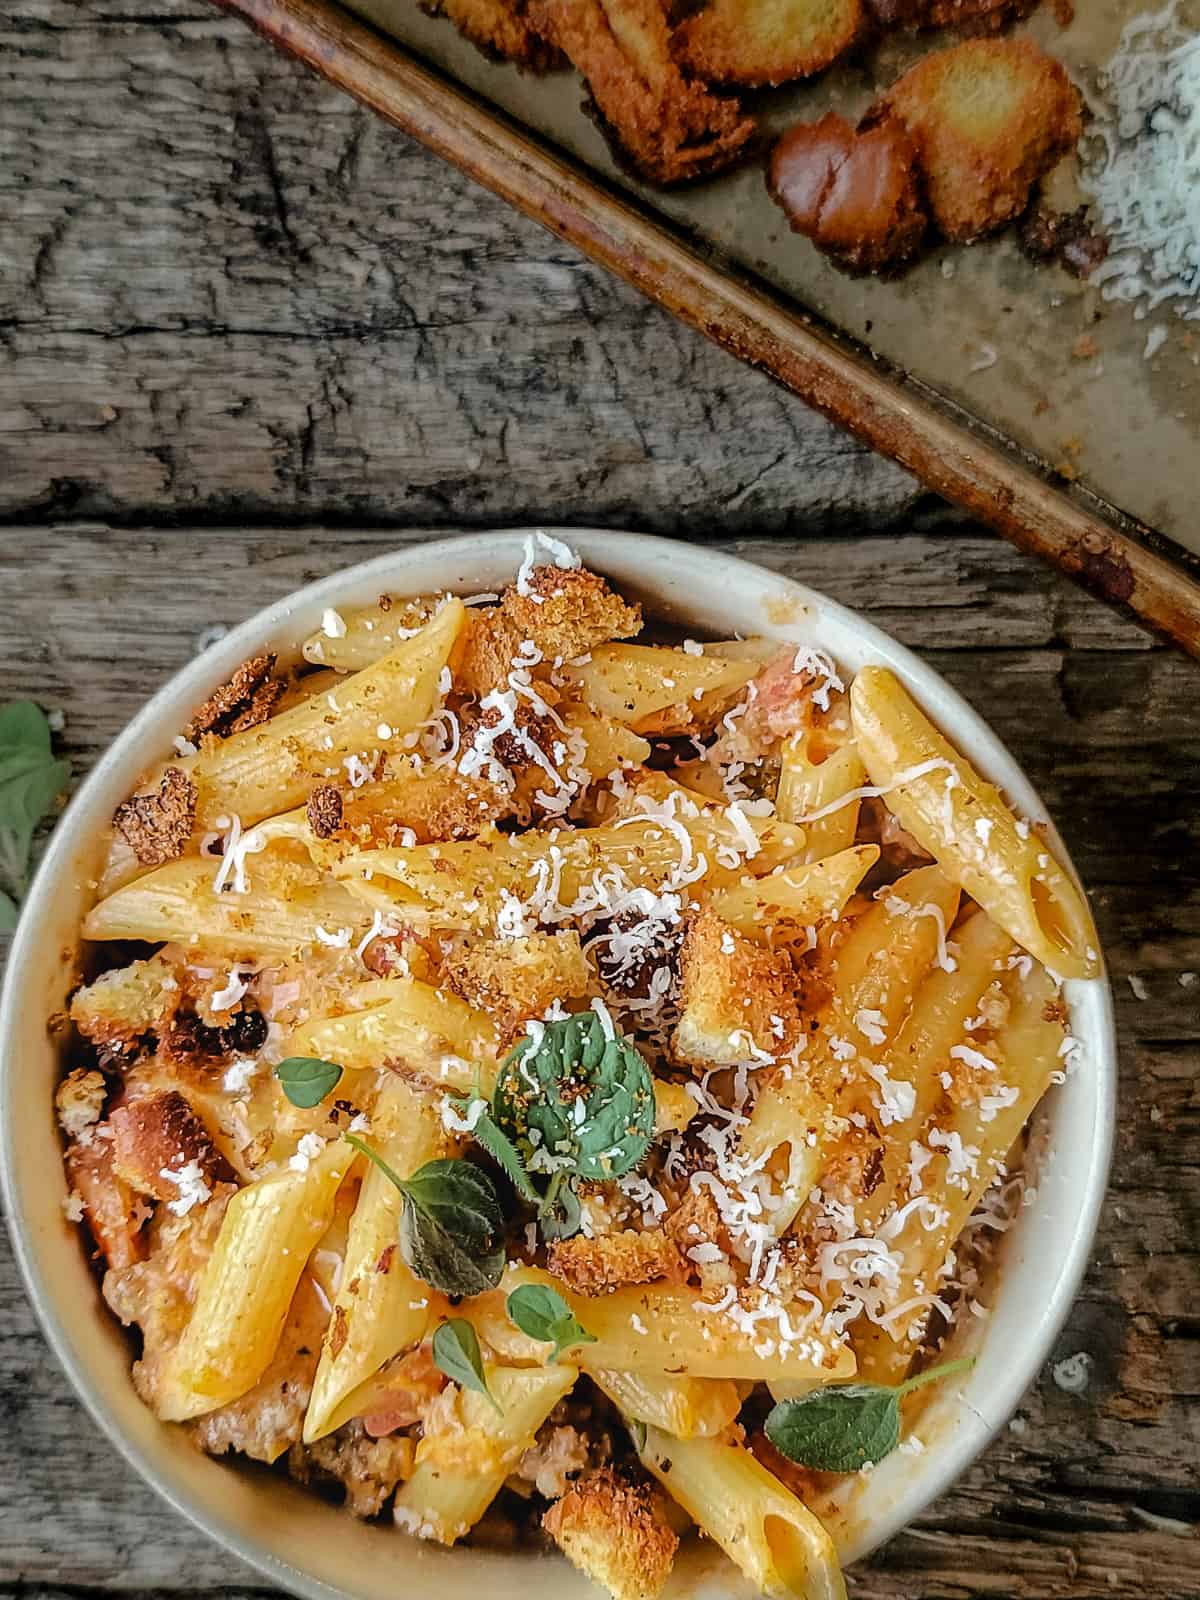 Penne pasta in a tomato cream sauce with sausage, cheese and croutons.